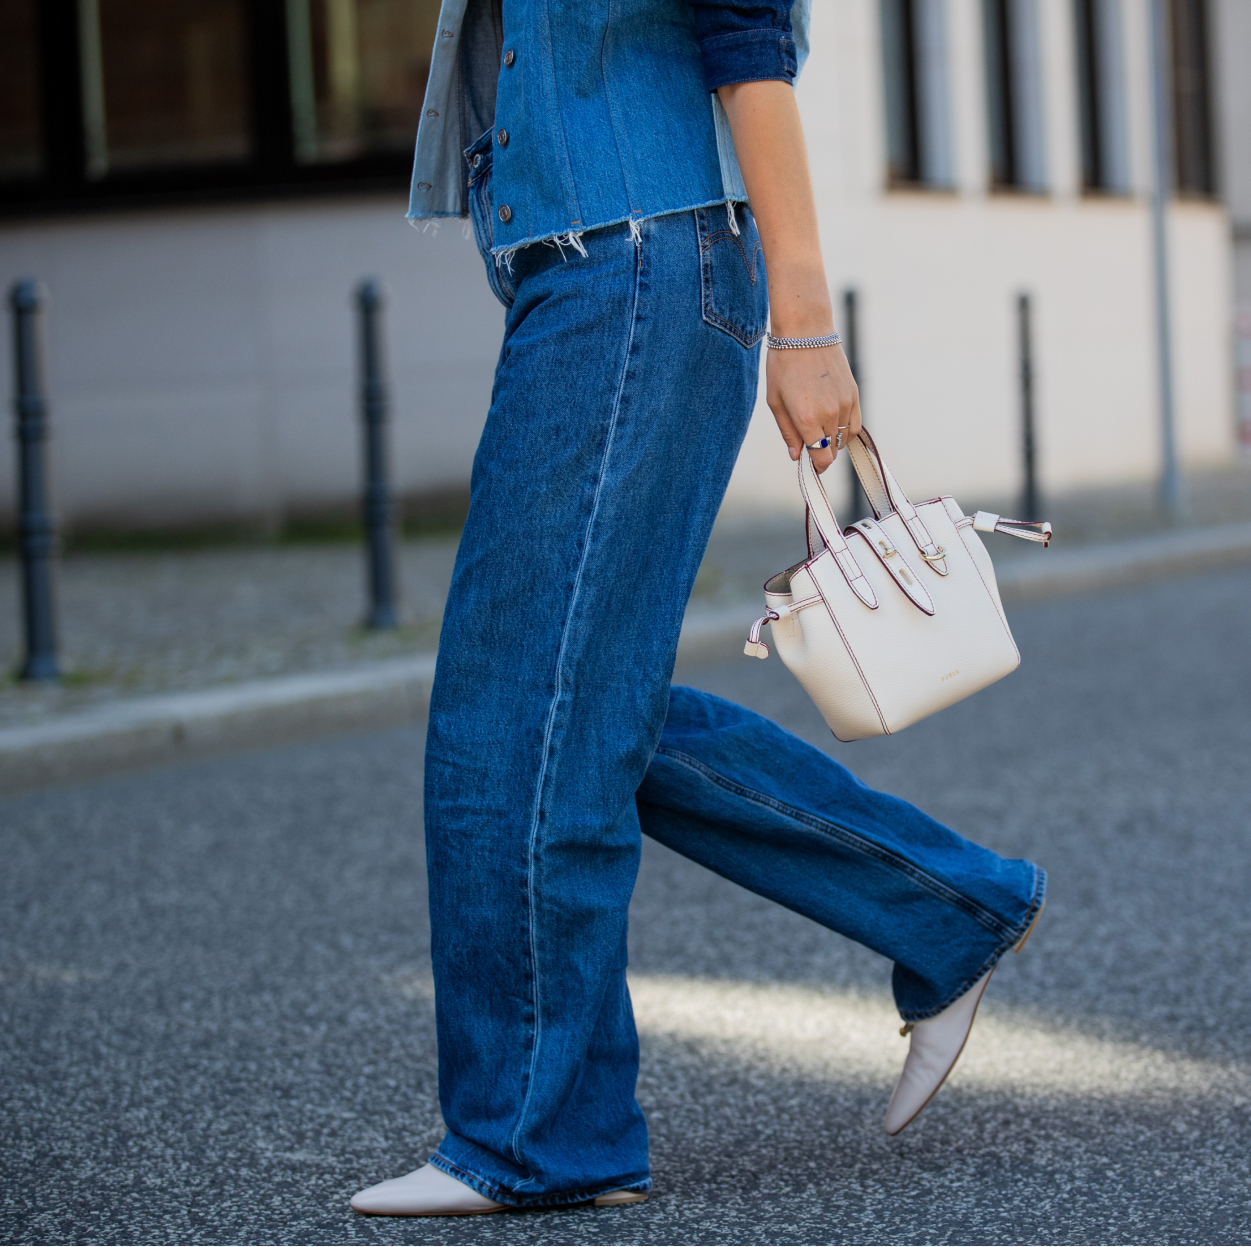 A Breakdown of the Best Levi's Jeans